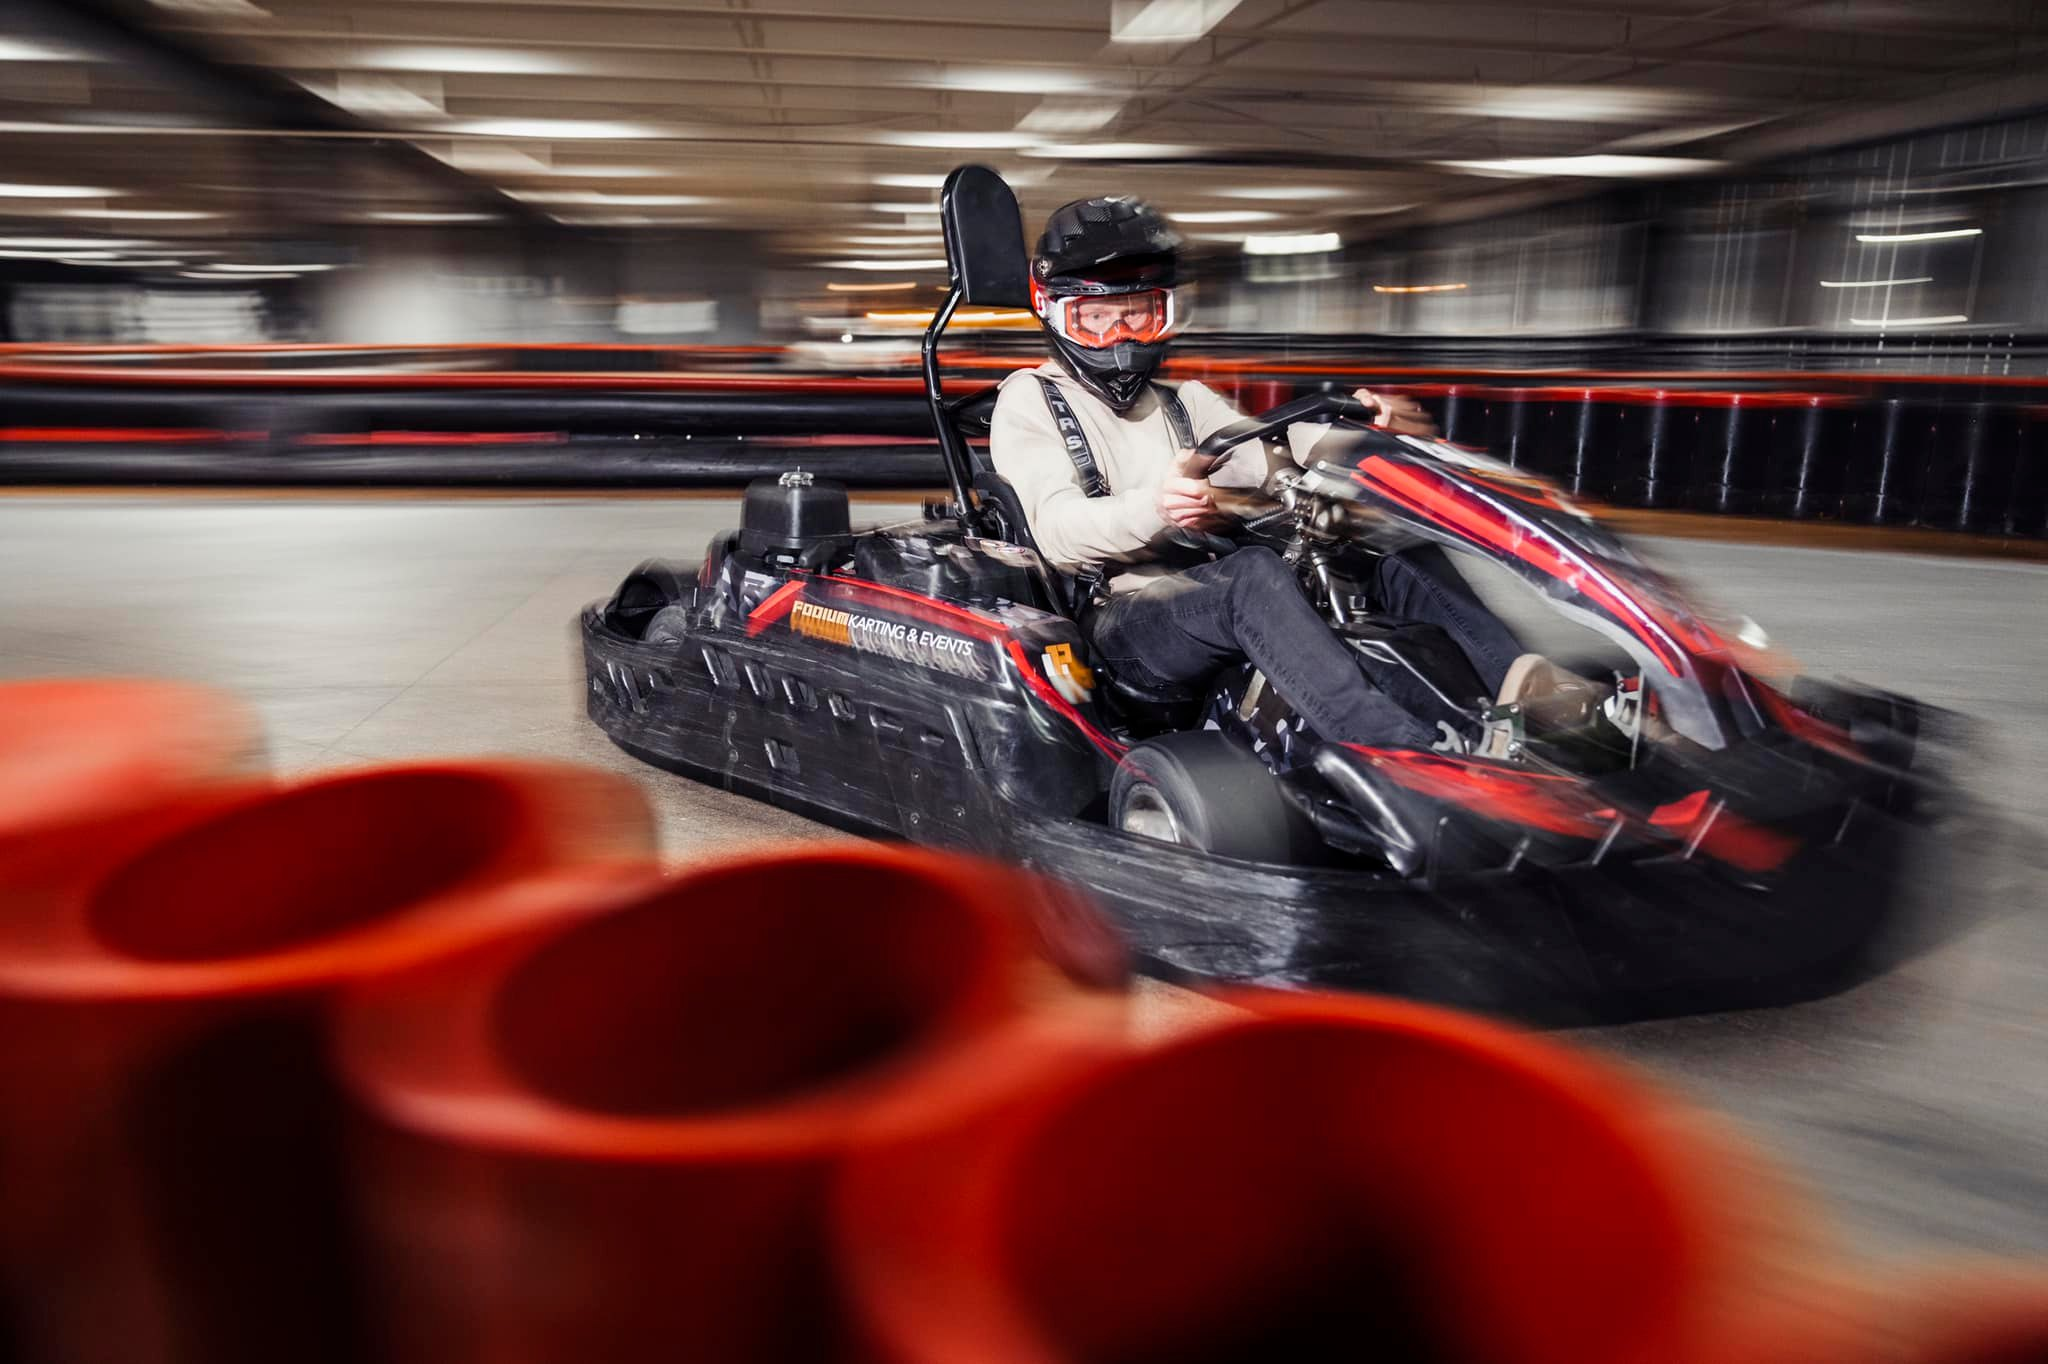 A man in a go-kart, racing at Podium Karting & Events